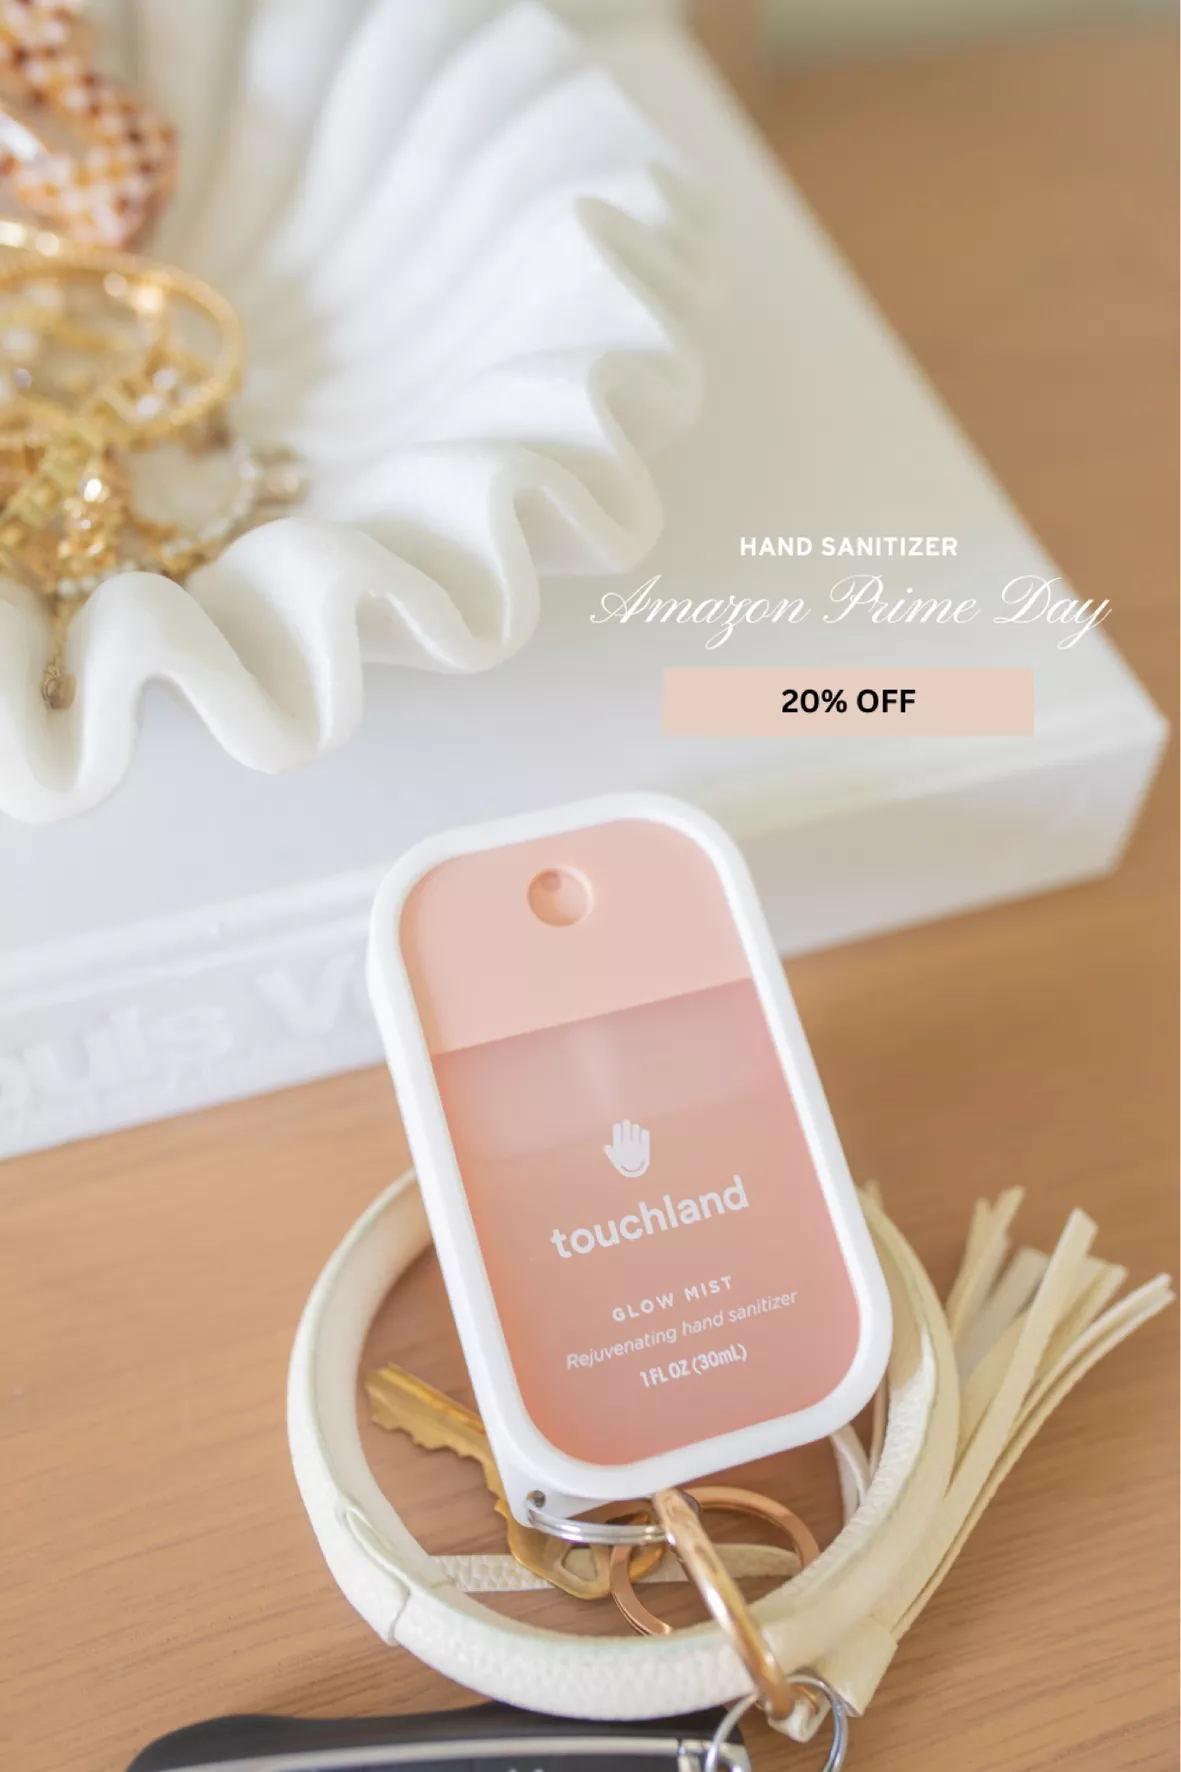 Touchland Glow Mist Rejuvenating … curated on LTK